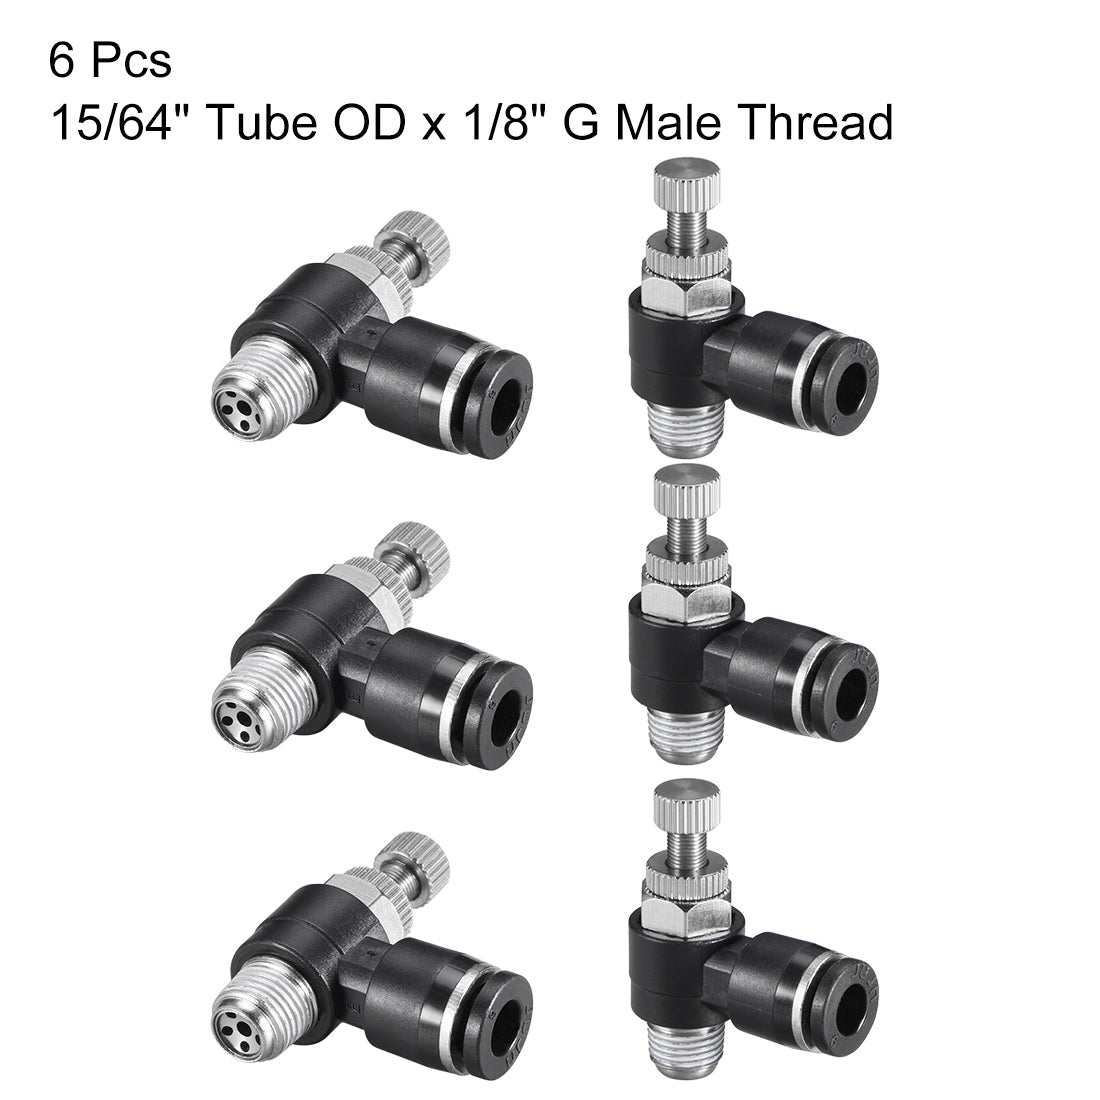 uxcell Uxcell Push-to-Connect Air Flow Control Valve, Elbow, 15/64" Tube OD x 1/8" G  Male Thread Speed controller Valve Tube fitting Black,6pcs